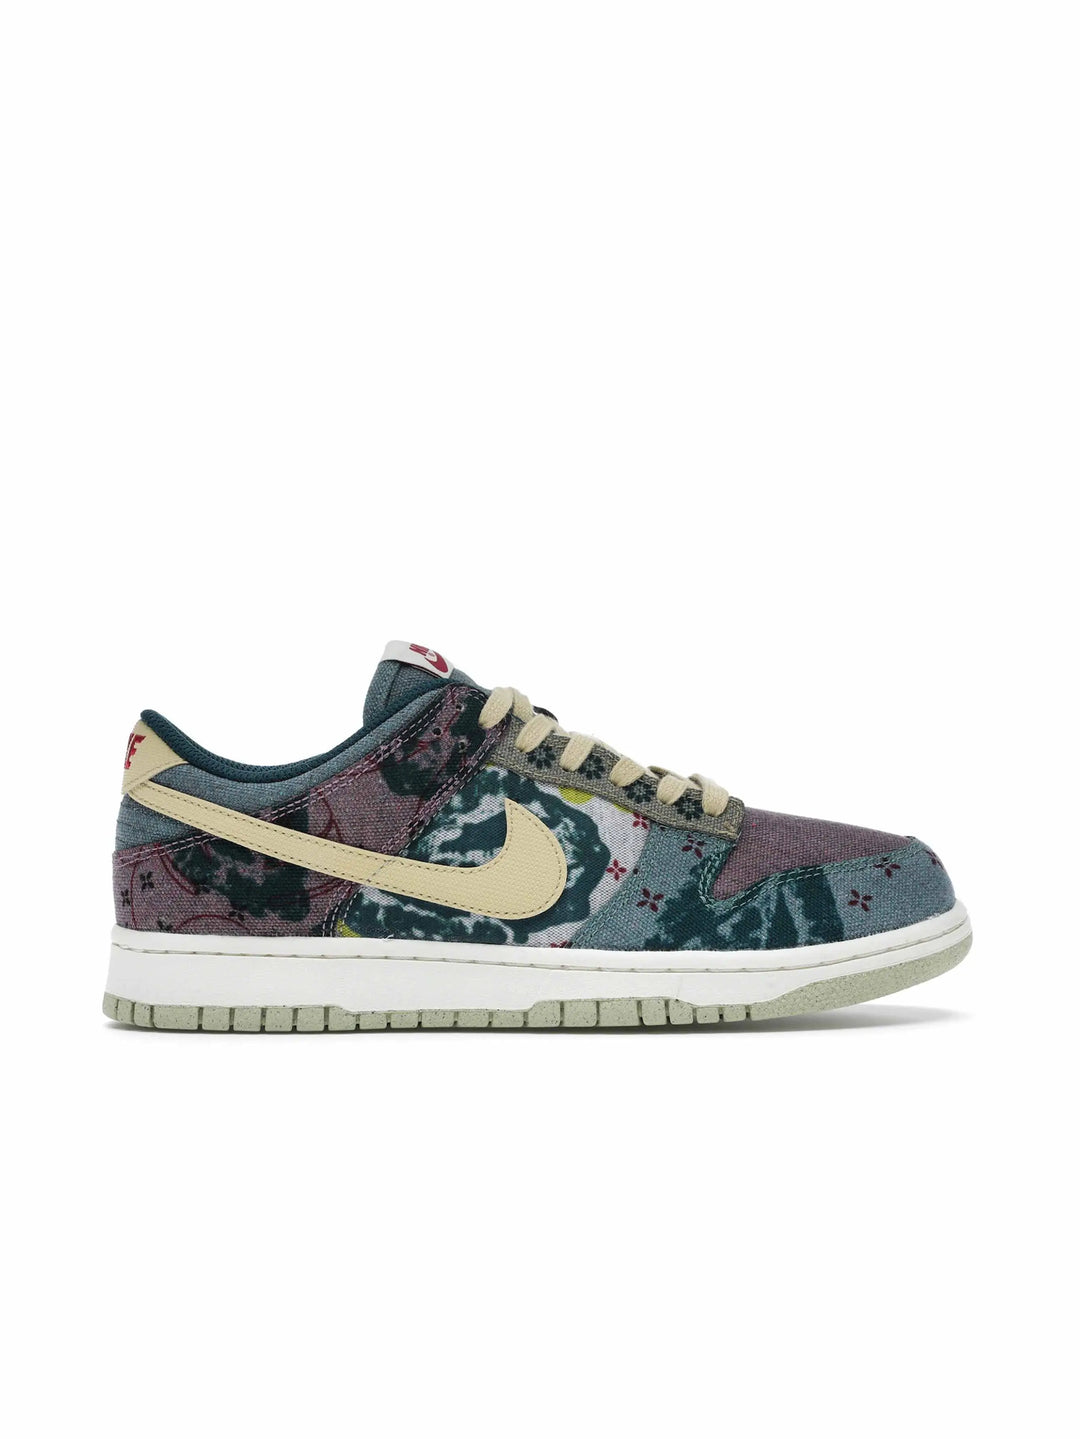 Nike Dunk Low Community Garden in Auckland, New Zealand - Shop name